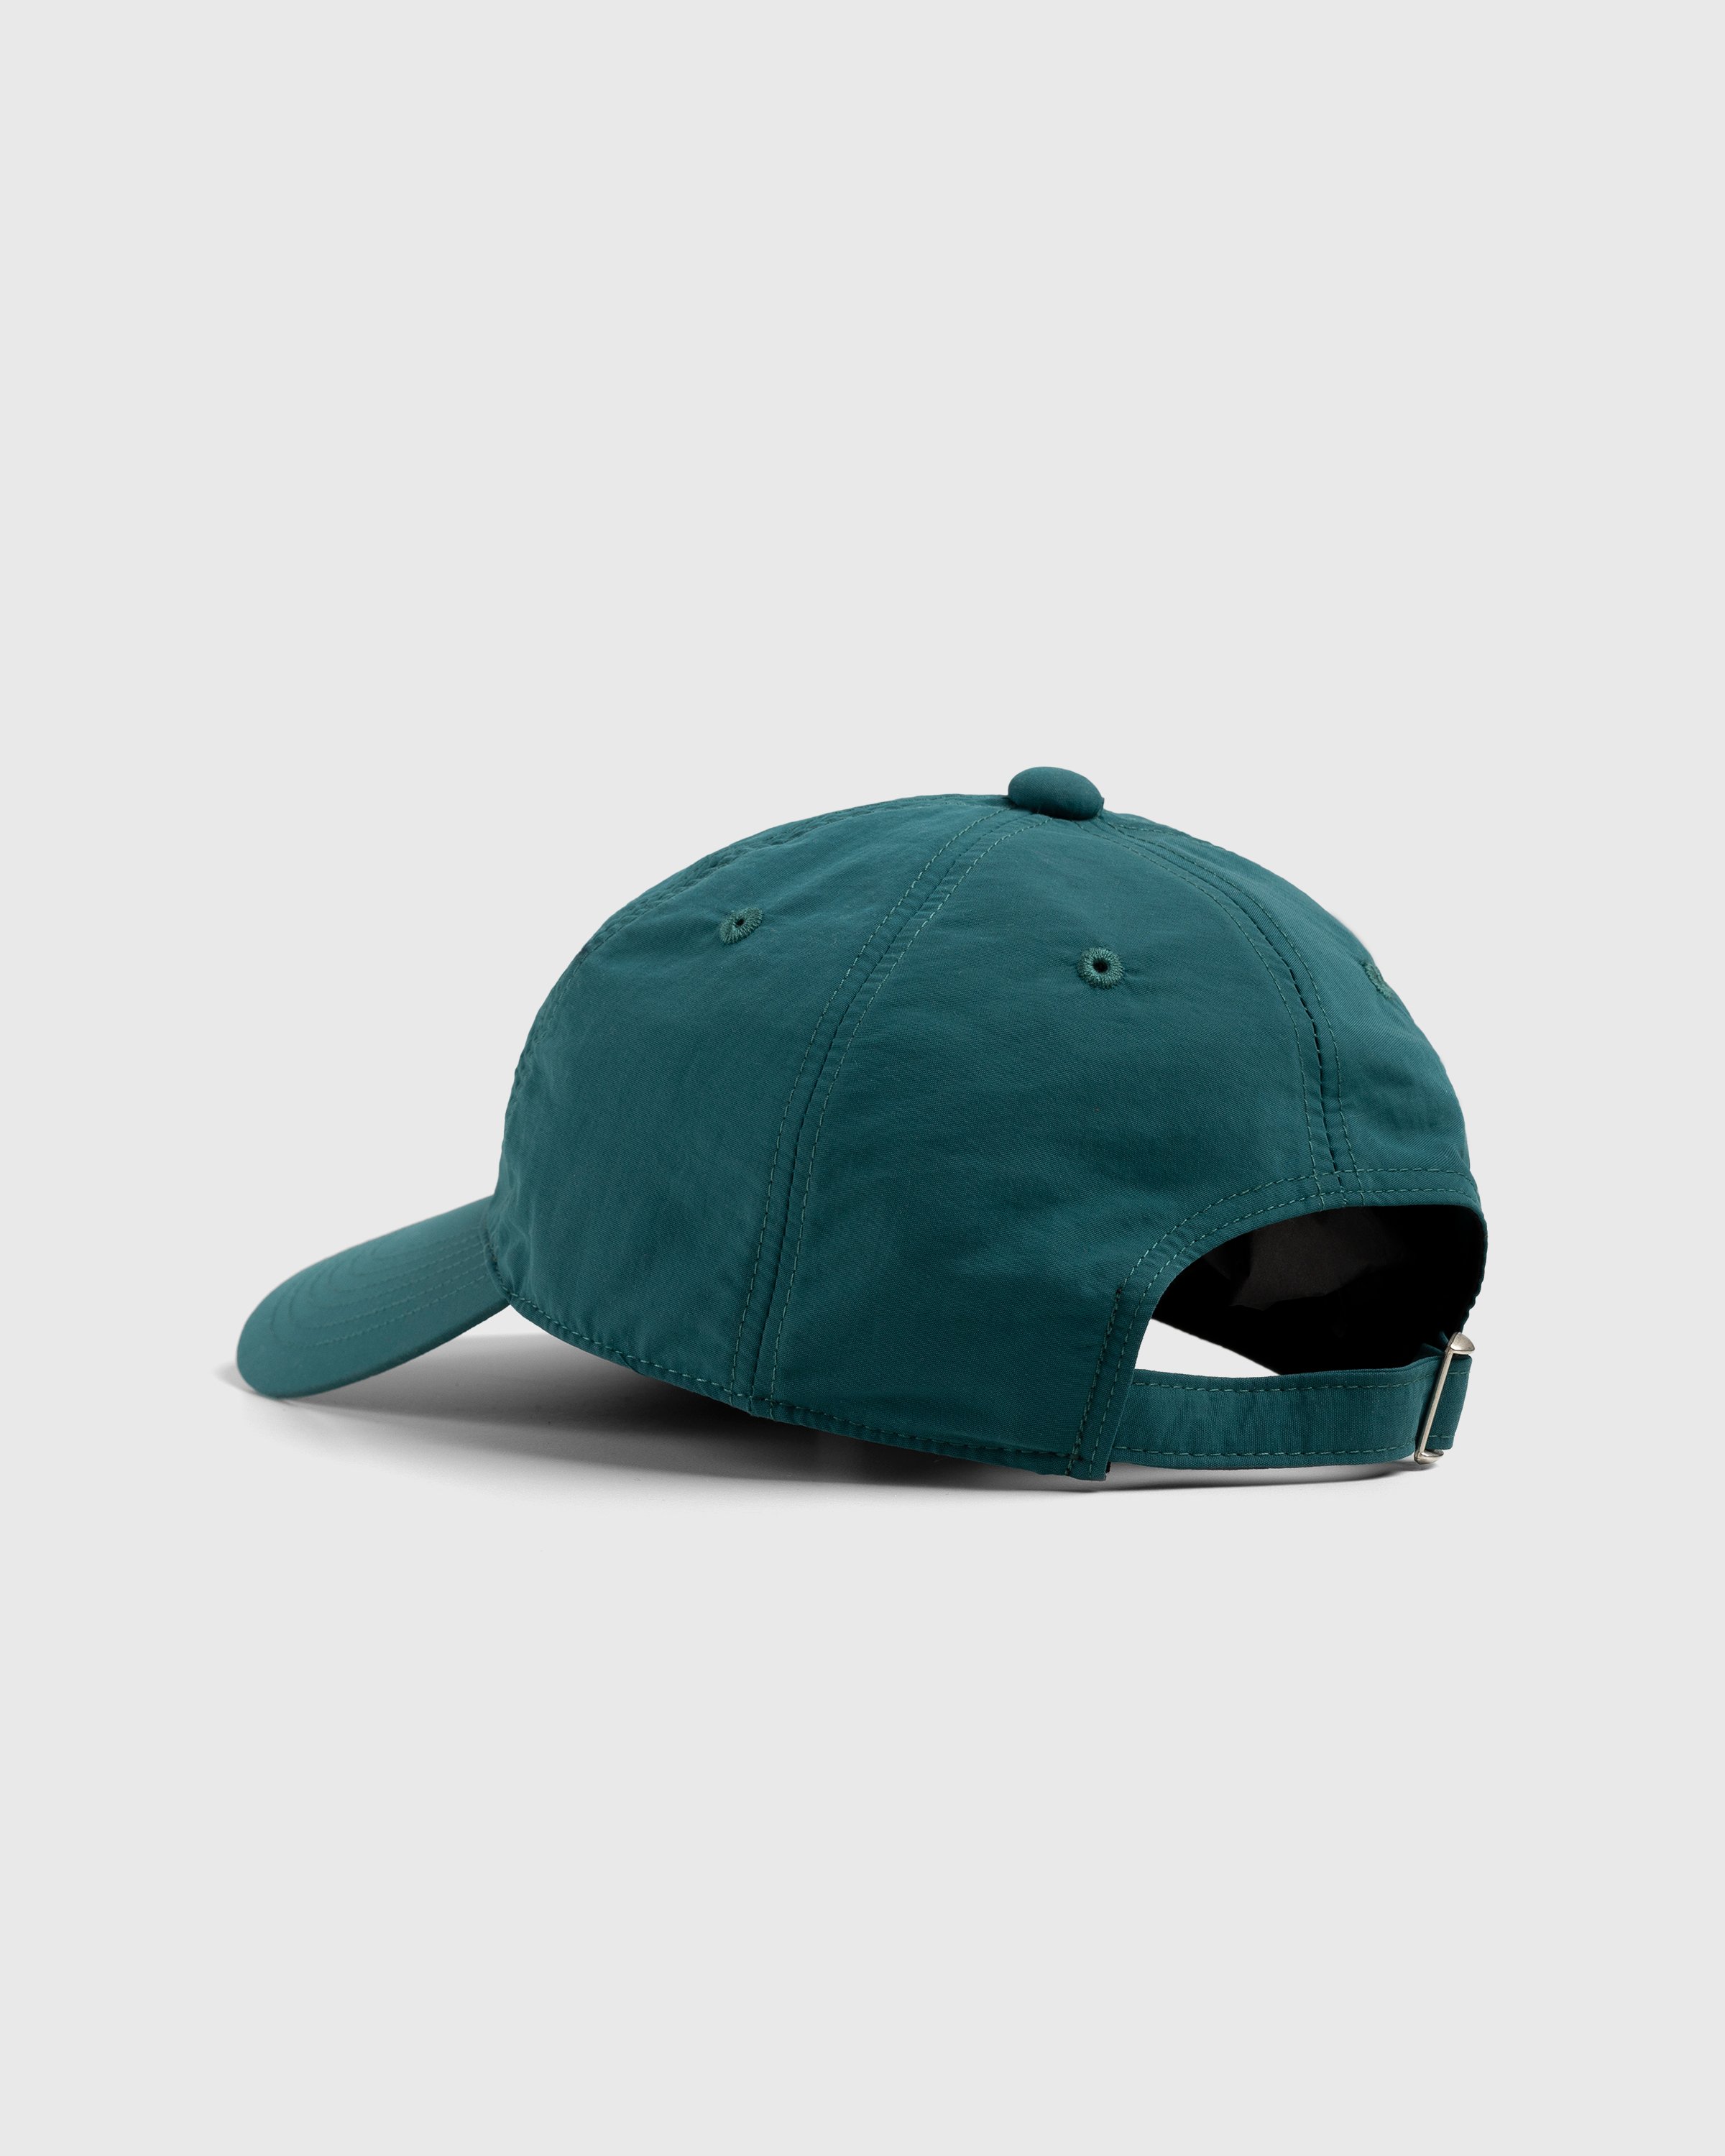 Highsnobiety - Peached Nylon Ball Cap Green - Accessories - Green - Image 3